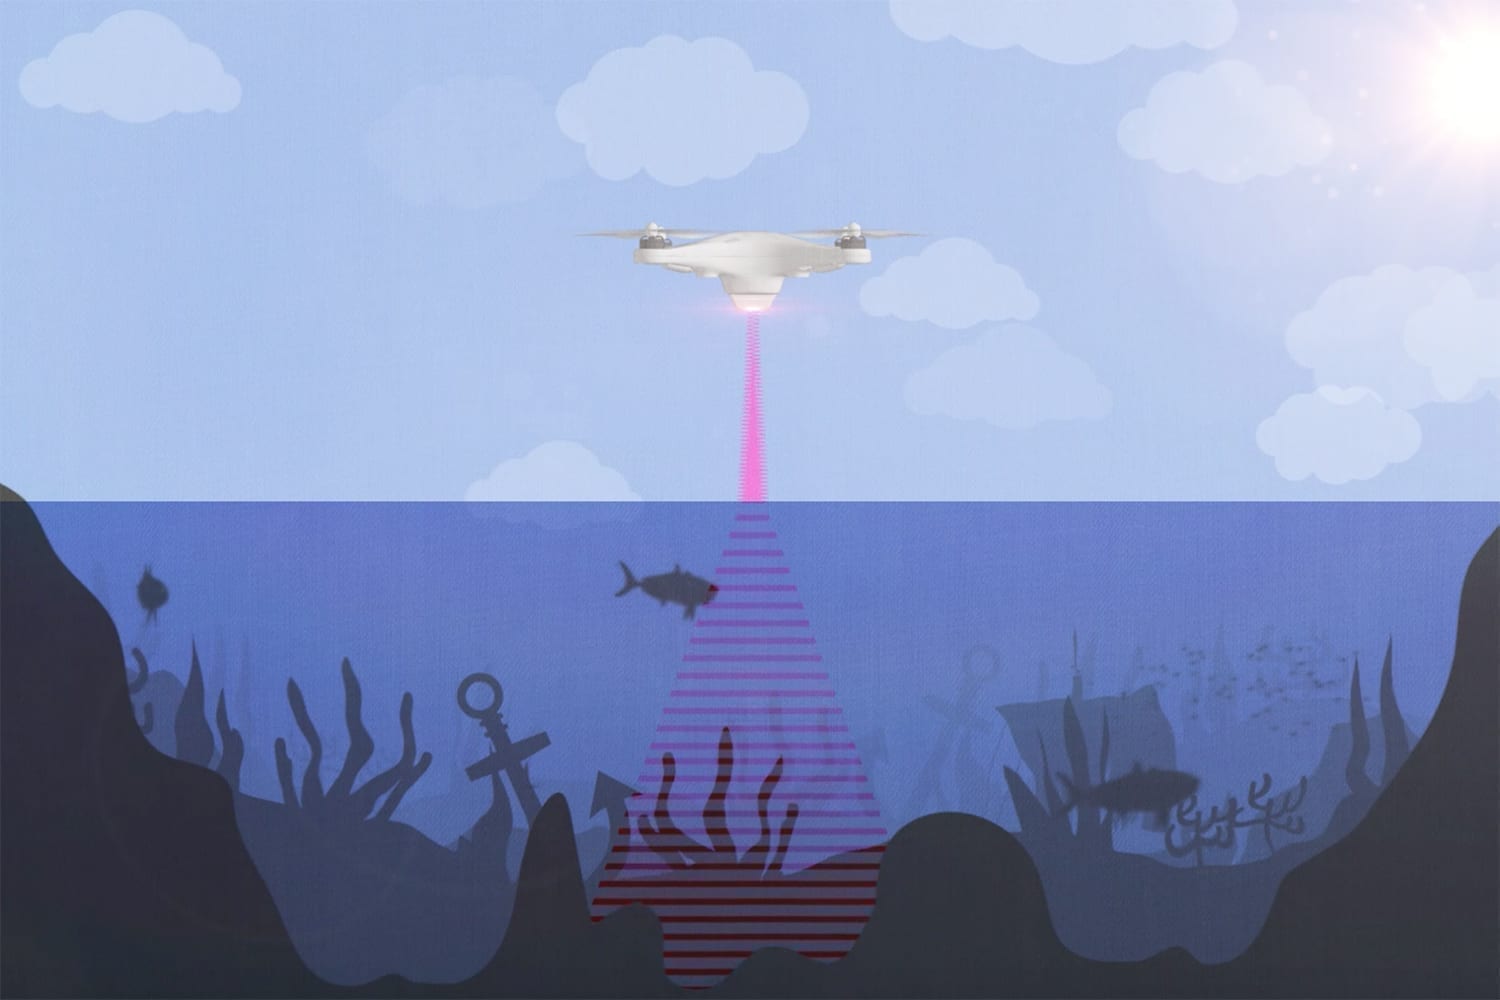 An artist rendition of the photoacoustic airborne sonar system operating from a drone to sense and image underwater objects. (Image credit: Kindea Labs)